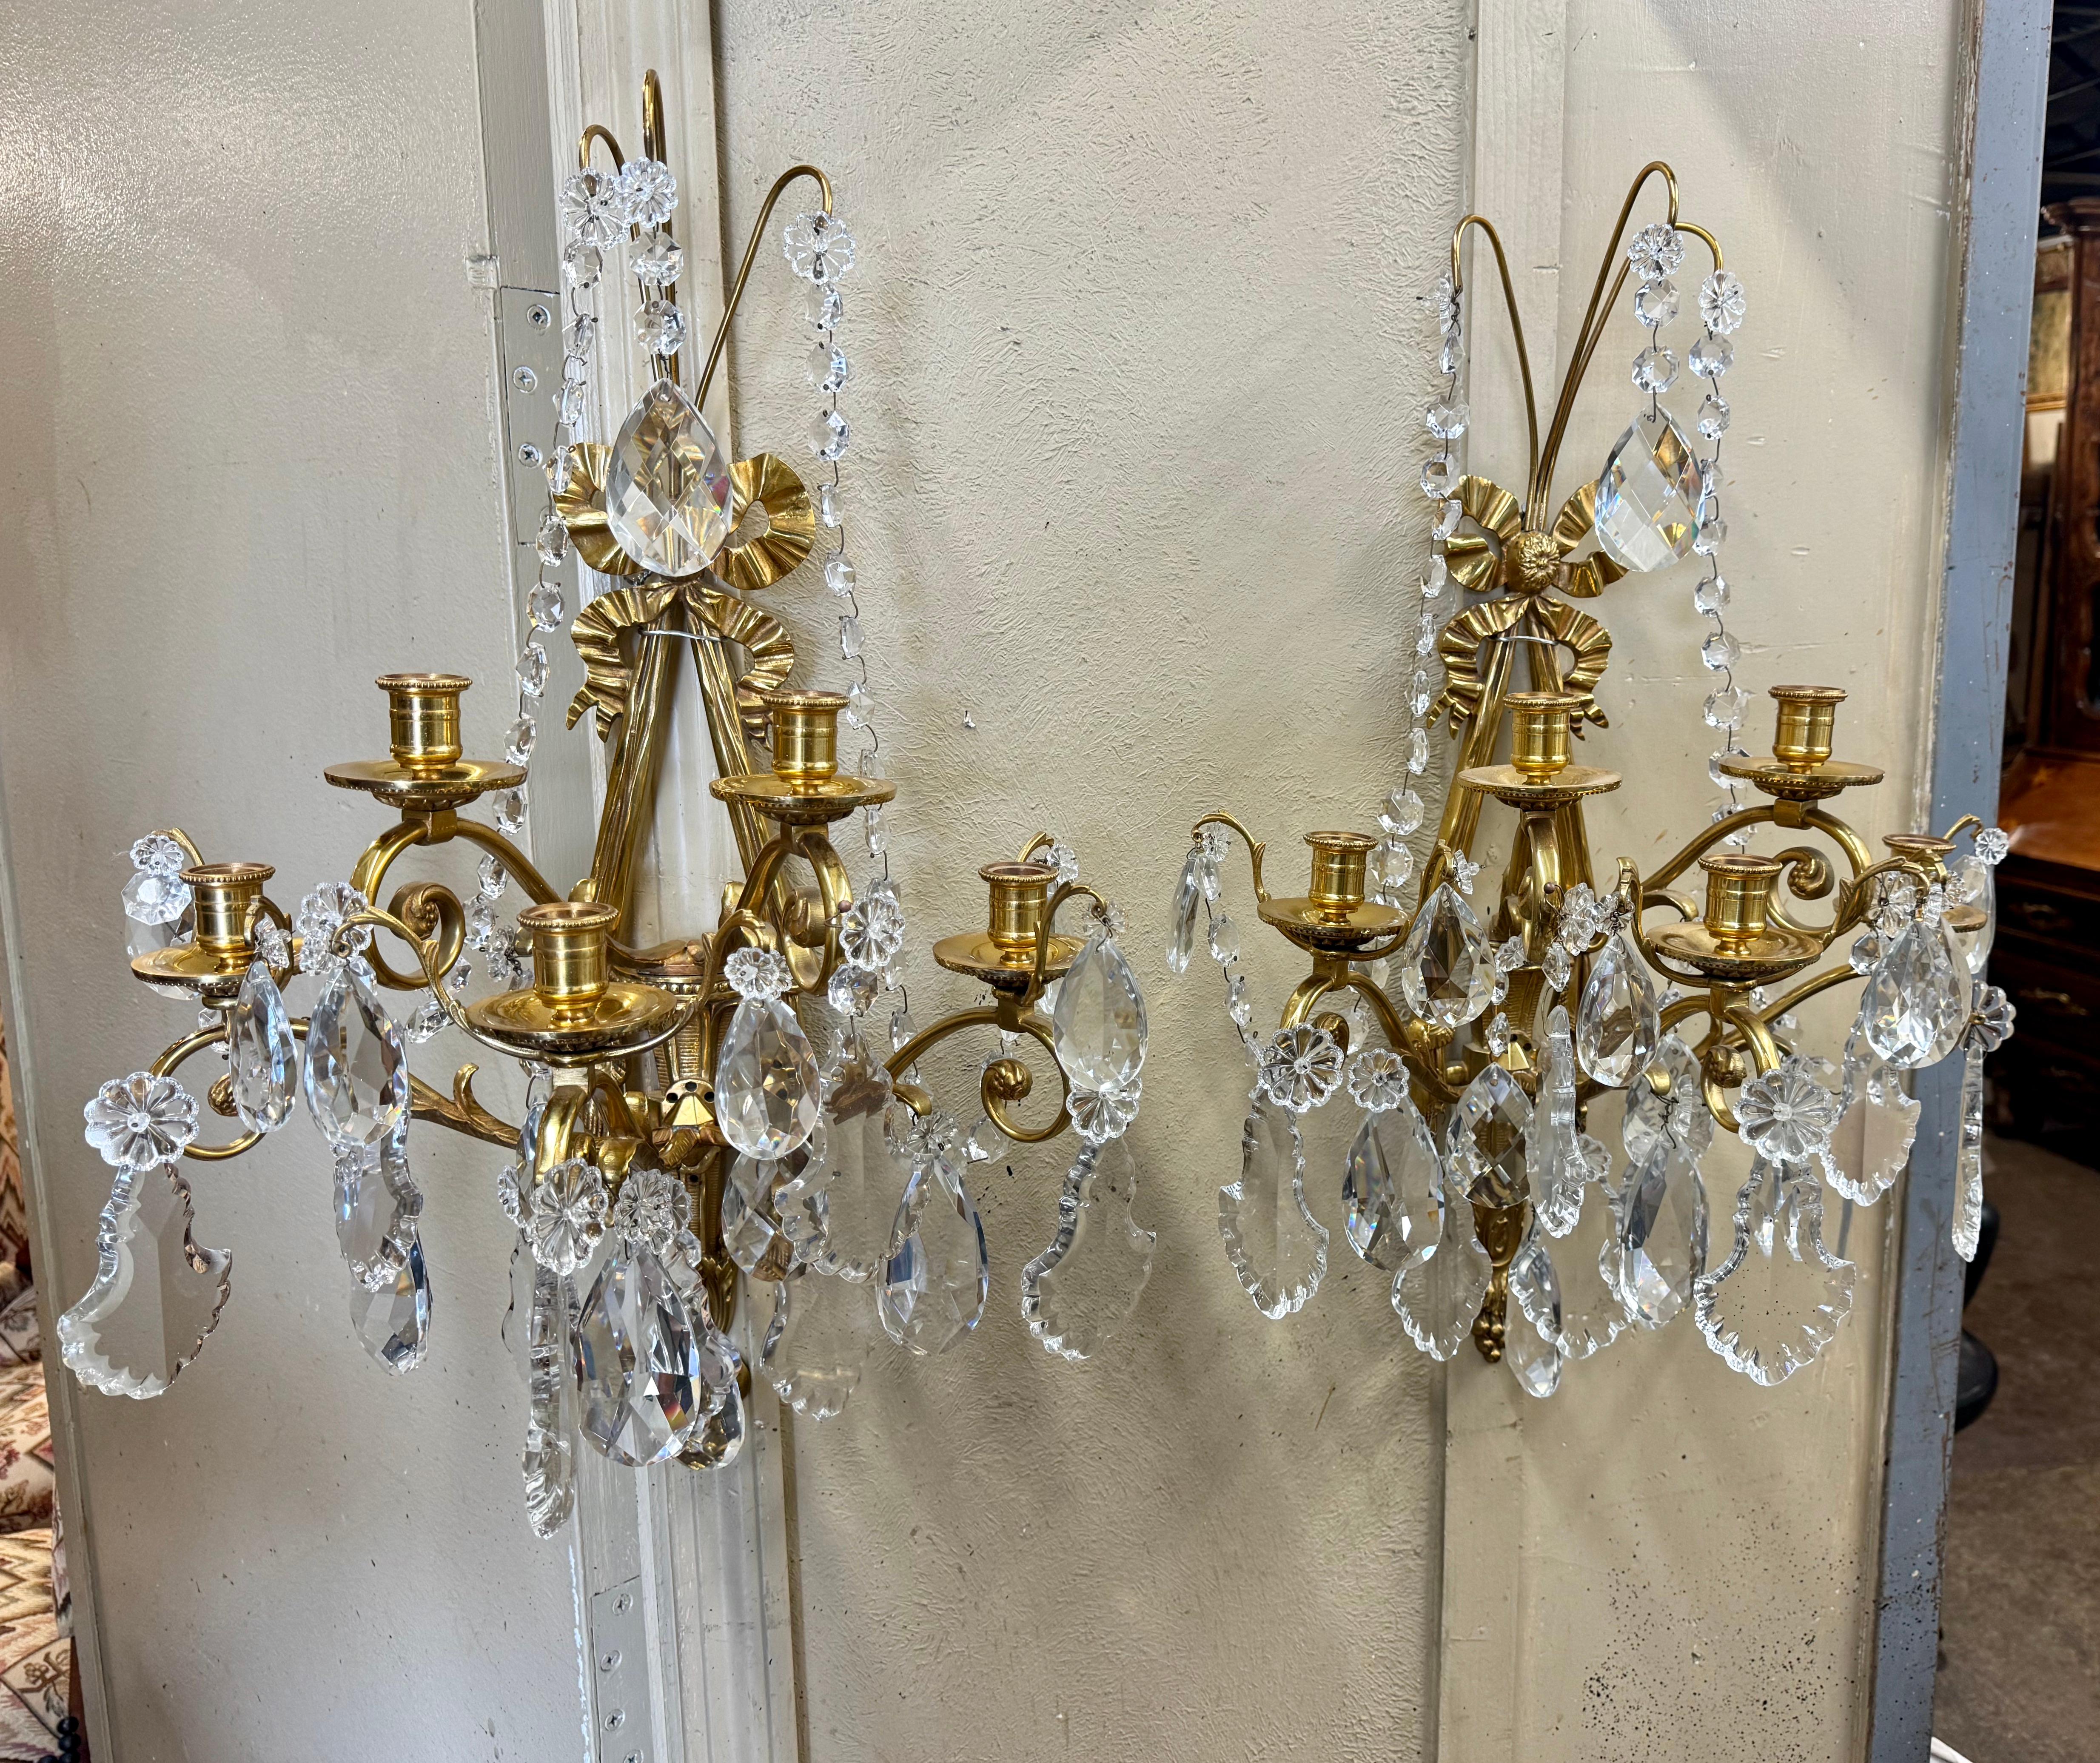 Pair of Mid-Century French Louis XVI Crystal and Bronze Dore Five-Light Sconces For Sale 2